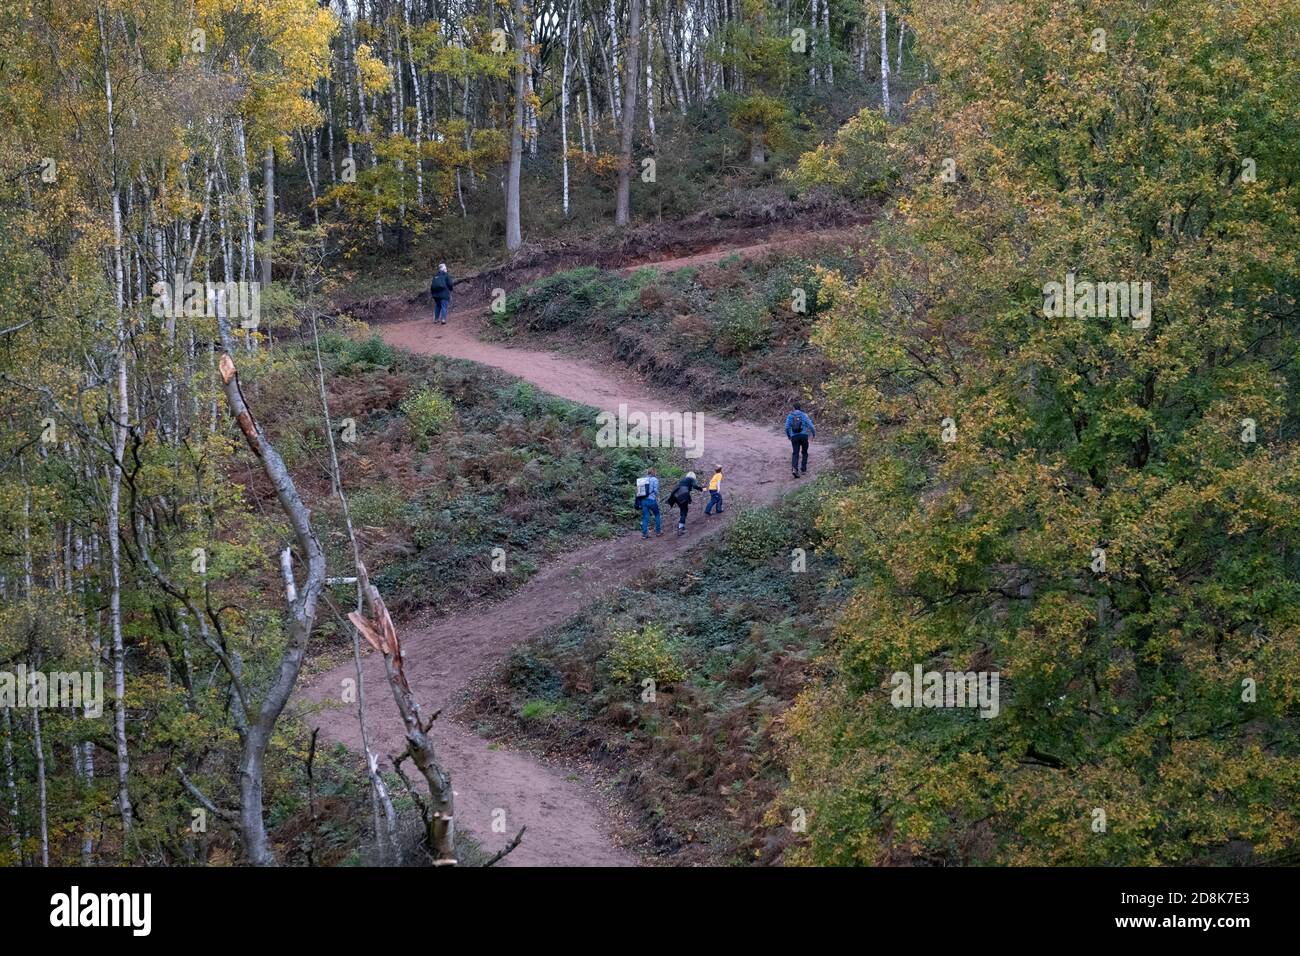 Walkers on a zig zag path in autumn woodland, Kinver, Staffordshire, UK. Stock Photo